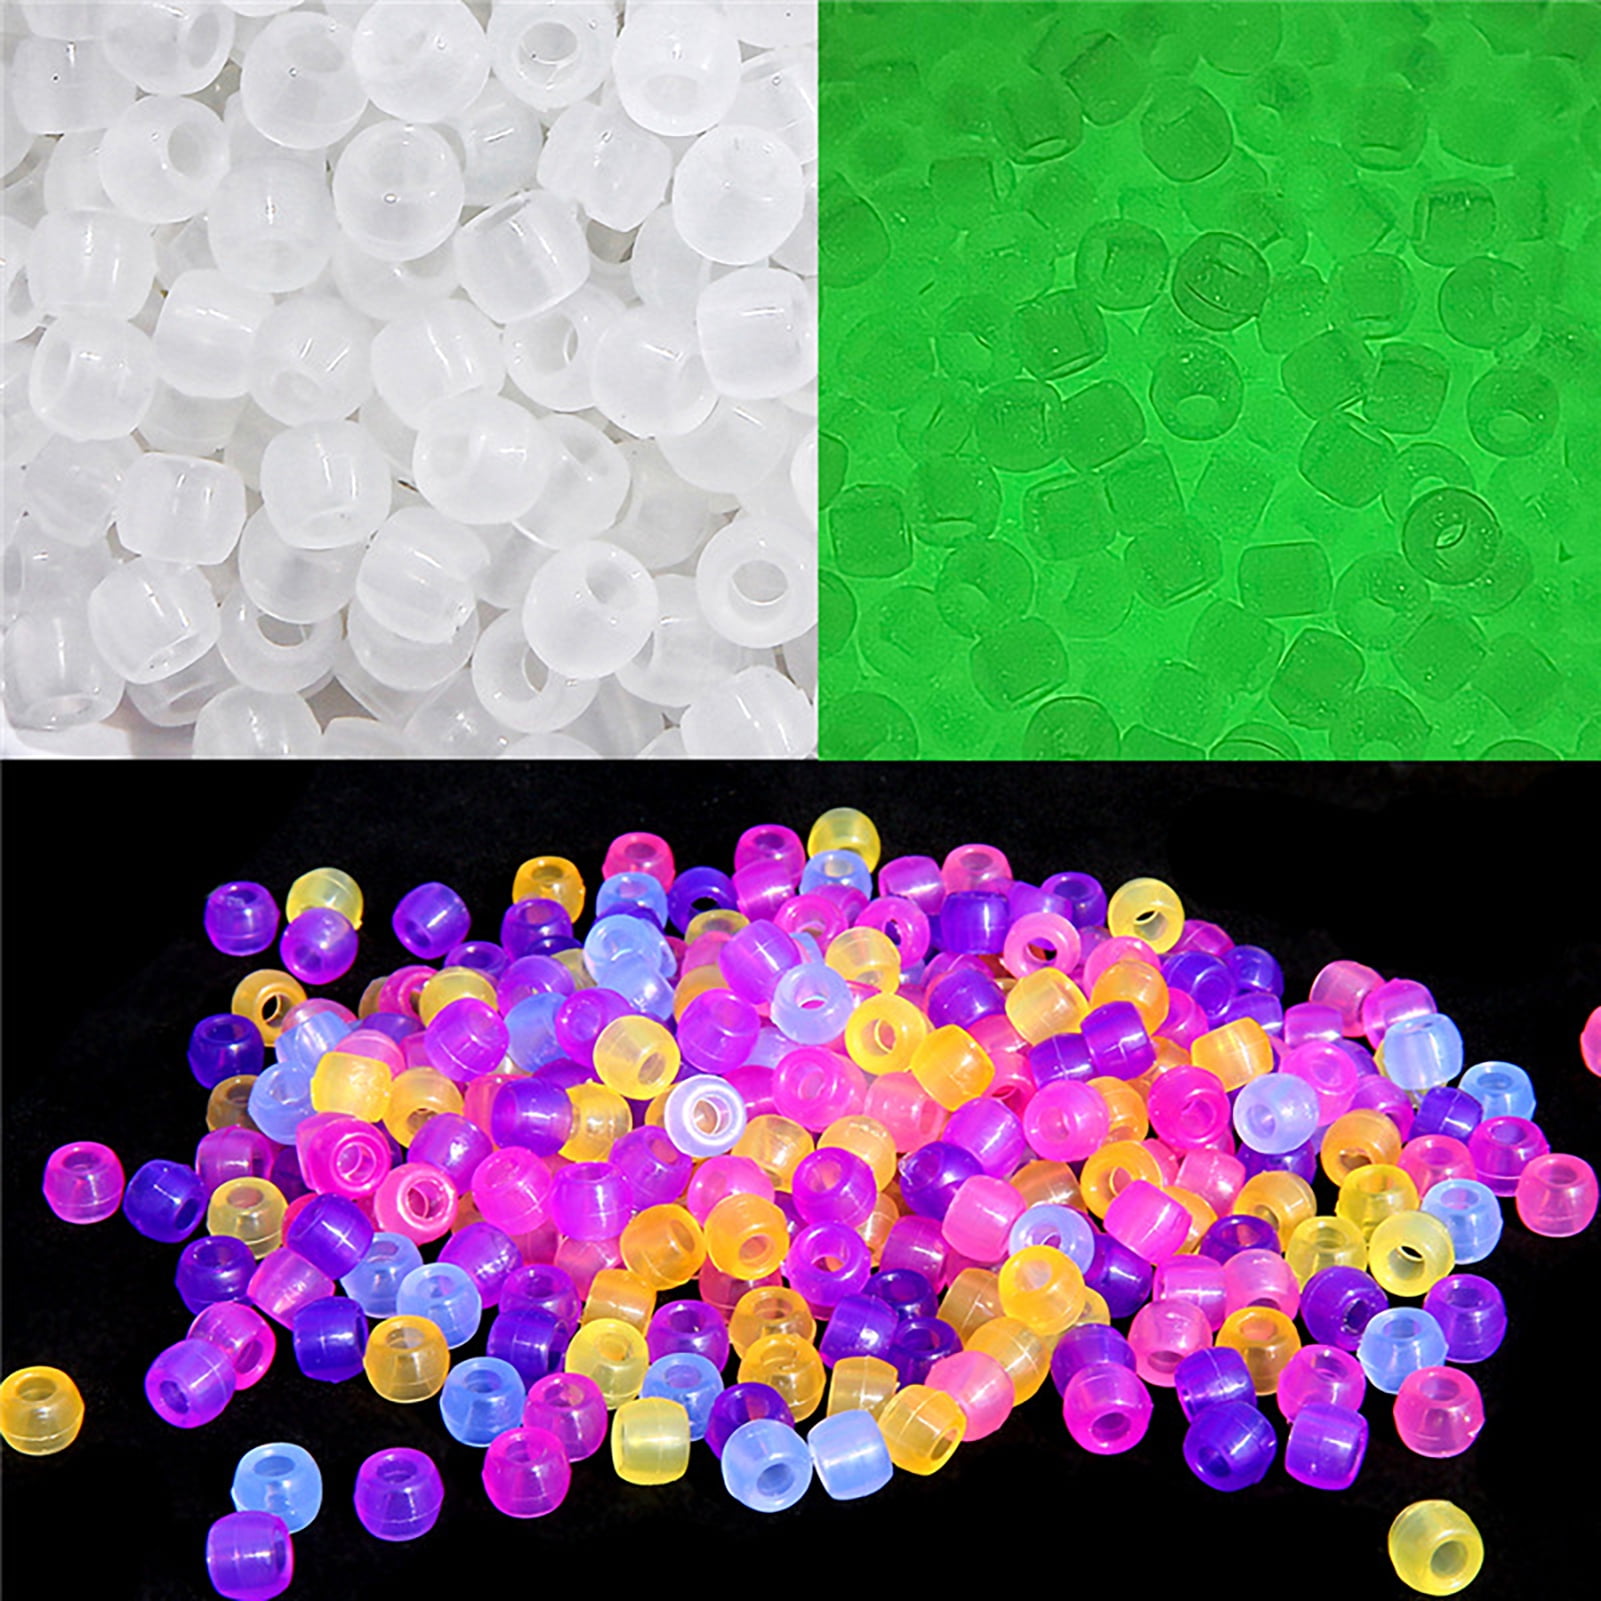 24 Colors 2.6mm Fuse Bead Set 15000-16000Pcs Art Crafting Melting Beads  Puzzle Magic DIY Art Craft Toys Refill Beads with Storage Case Pegboards  Patterns Tweezers Ironing Paper for Making DIY Art and 